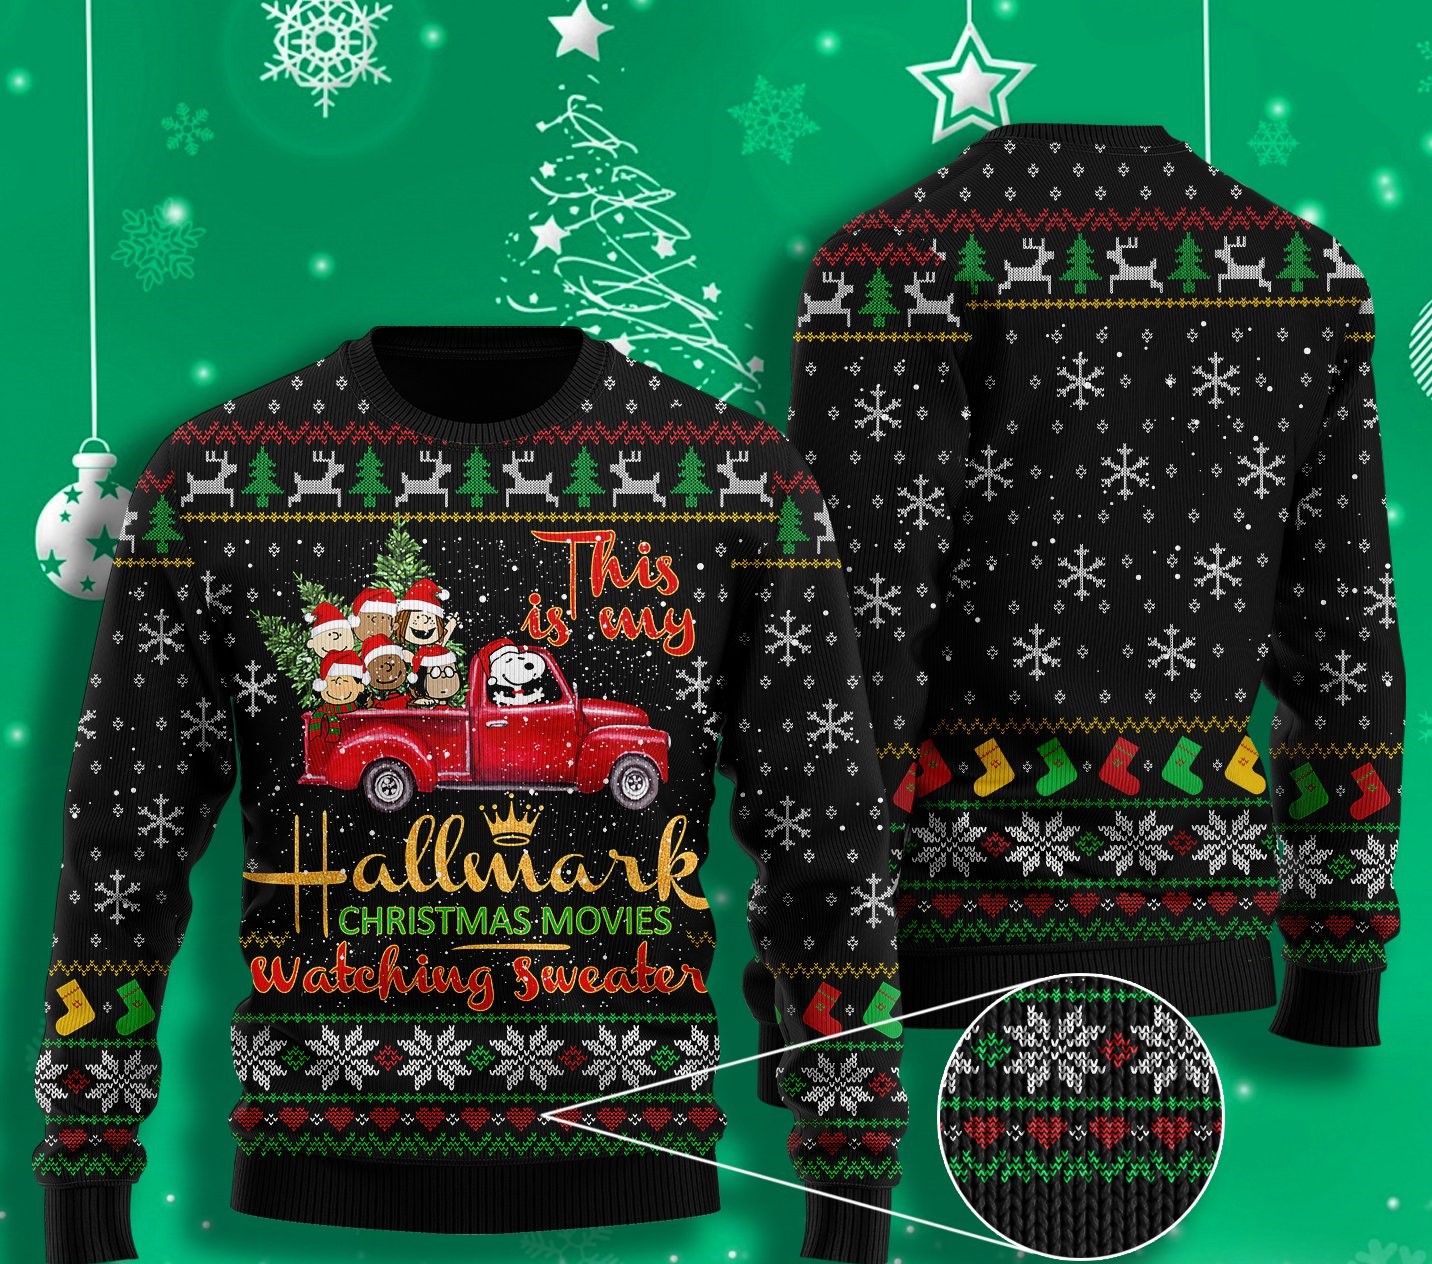 snoopy this is my hallmark christmas movie watching ugly christmas sweater 2 - Copy (3)